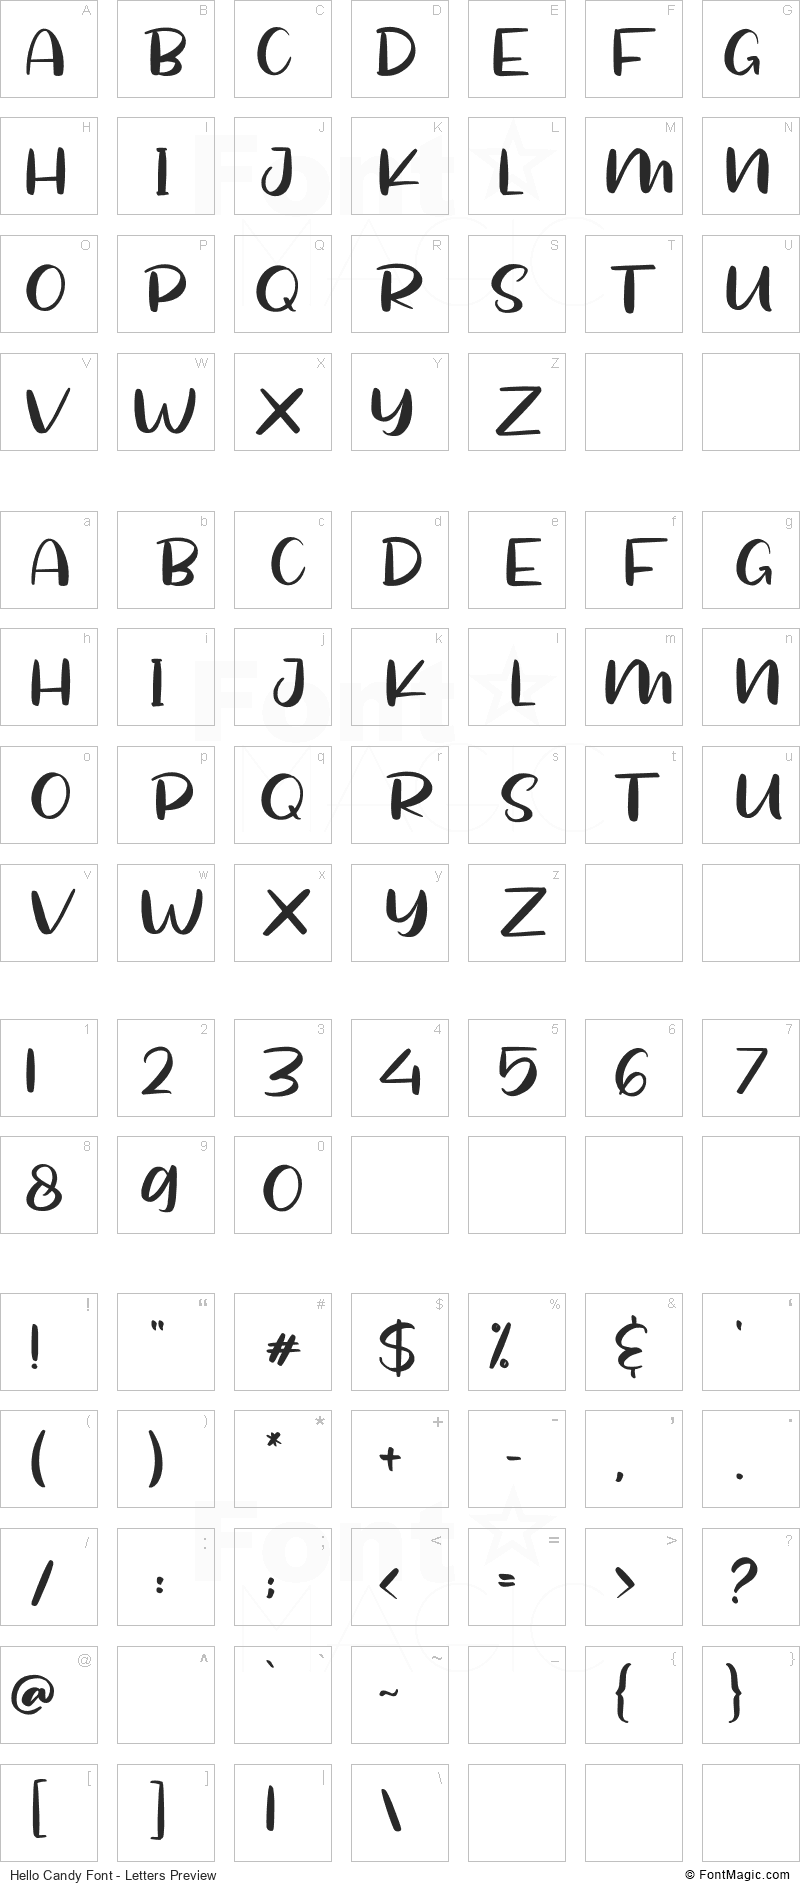 Hello Candy Font - All Latters Preview Chart